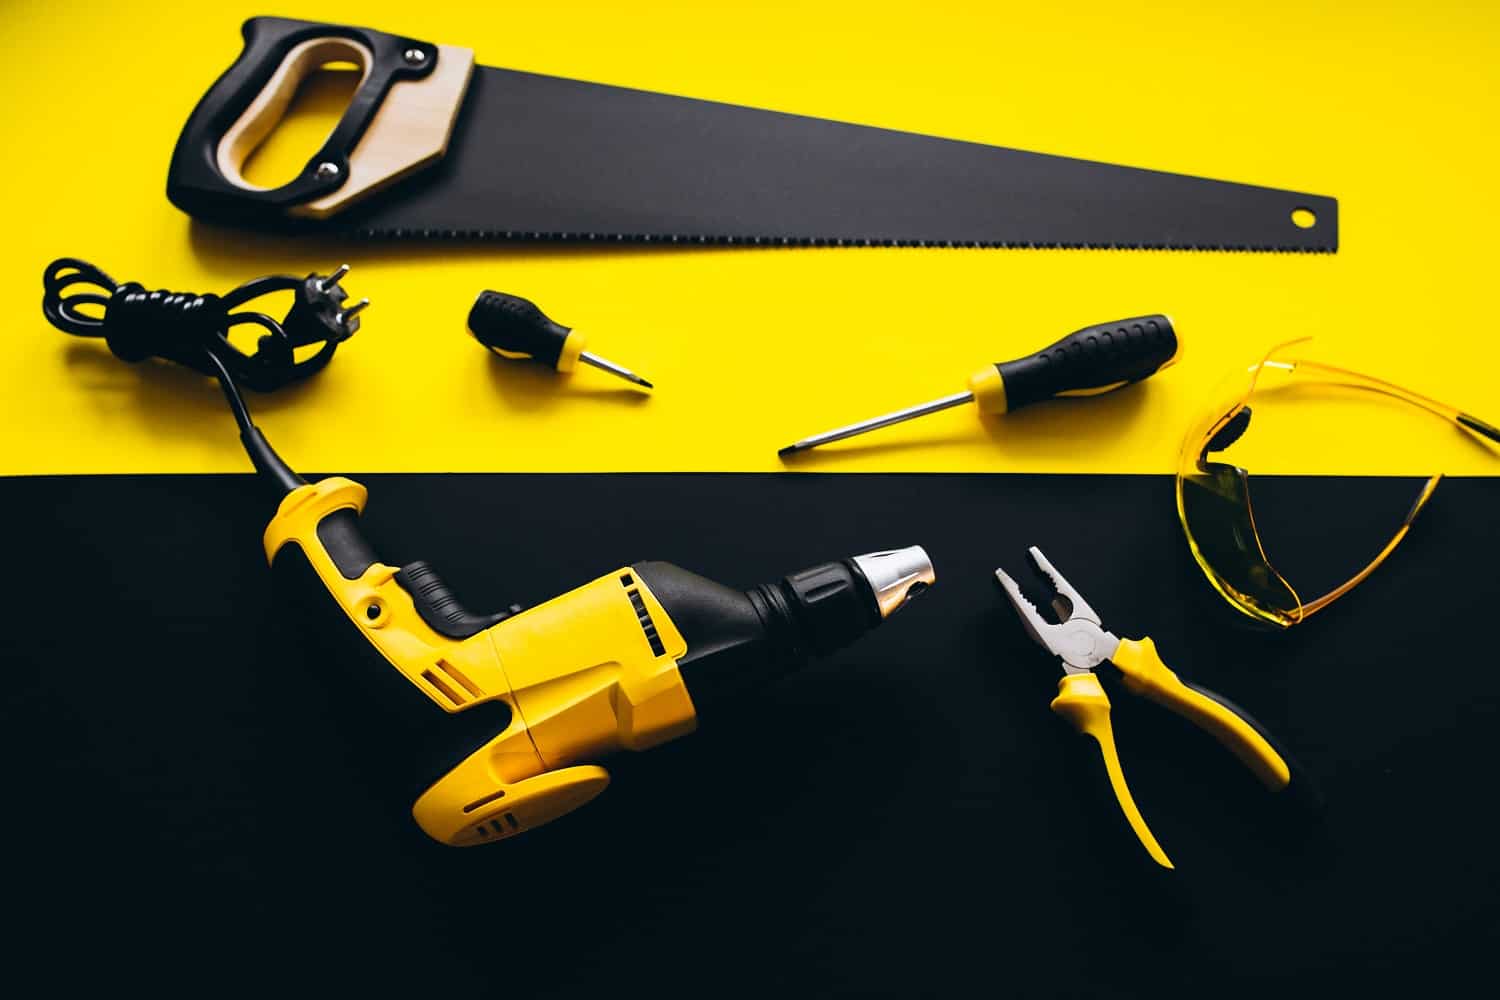 Set of yellow tools on a black and yellow background